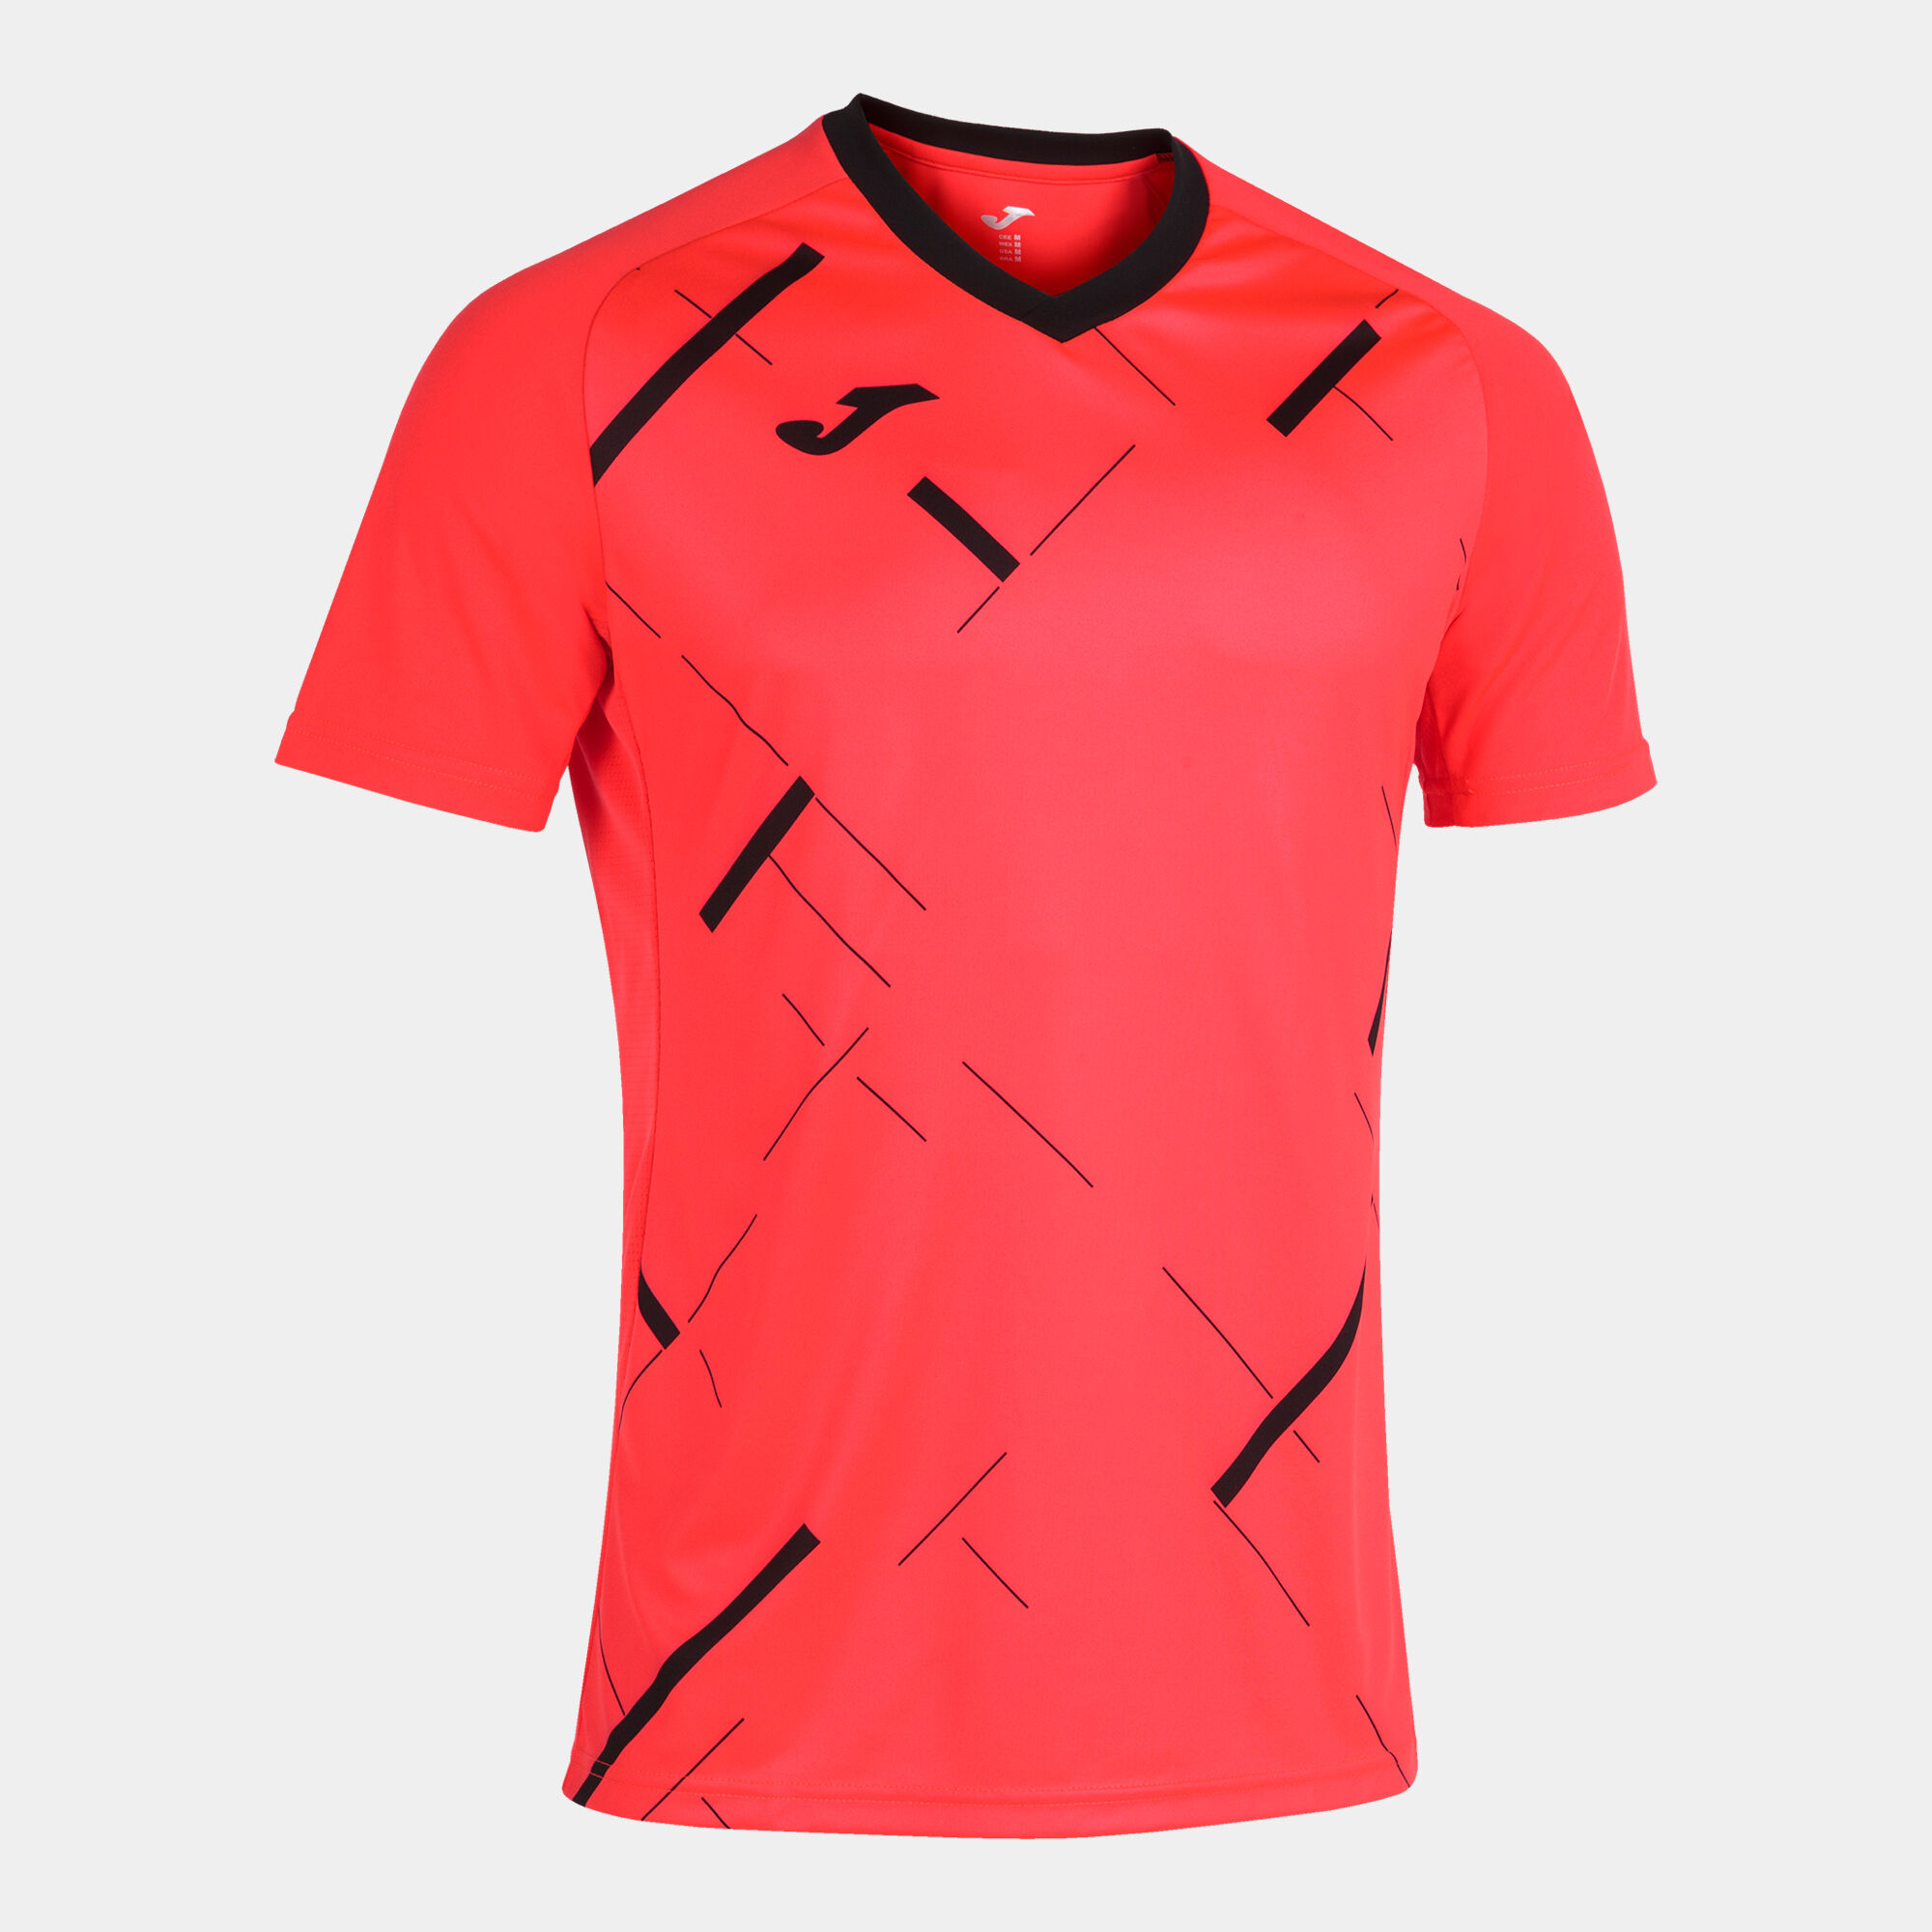 MAILLOT MANCHES COURTES HOMME TIGER III CORAIL FLUO NOIR